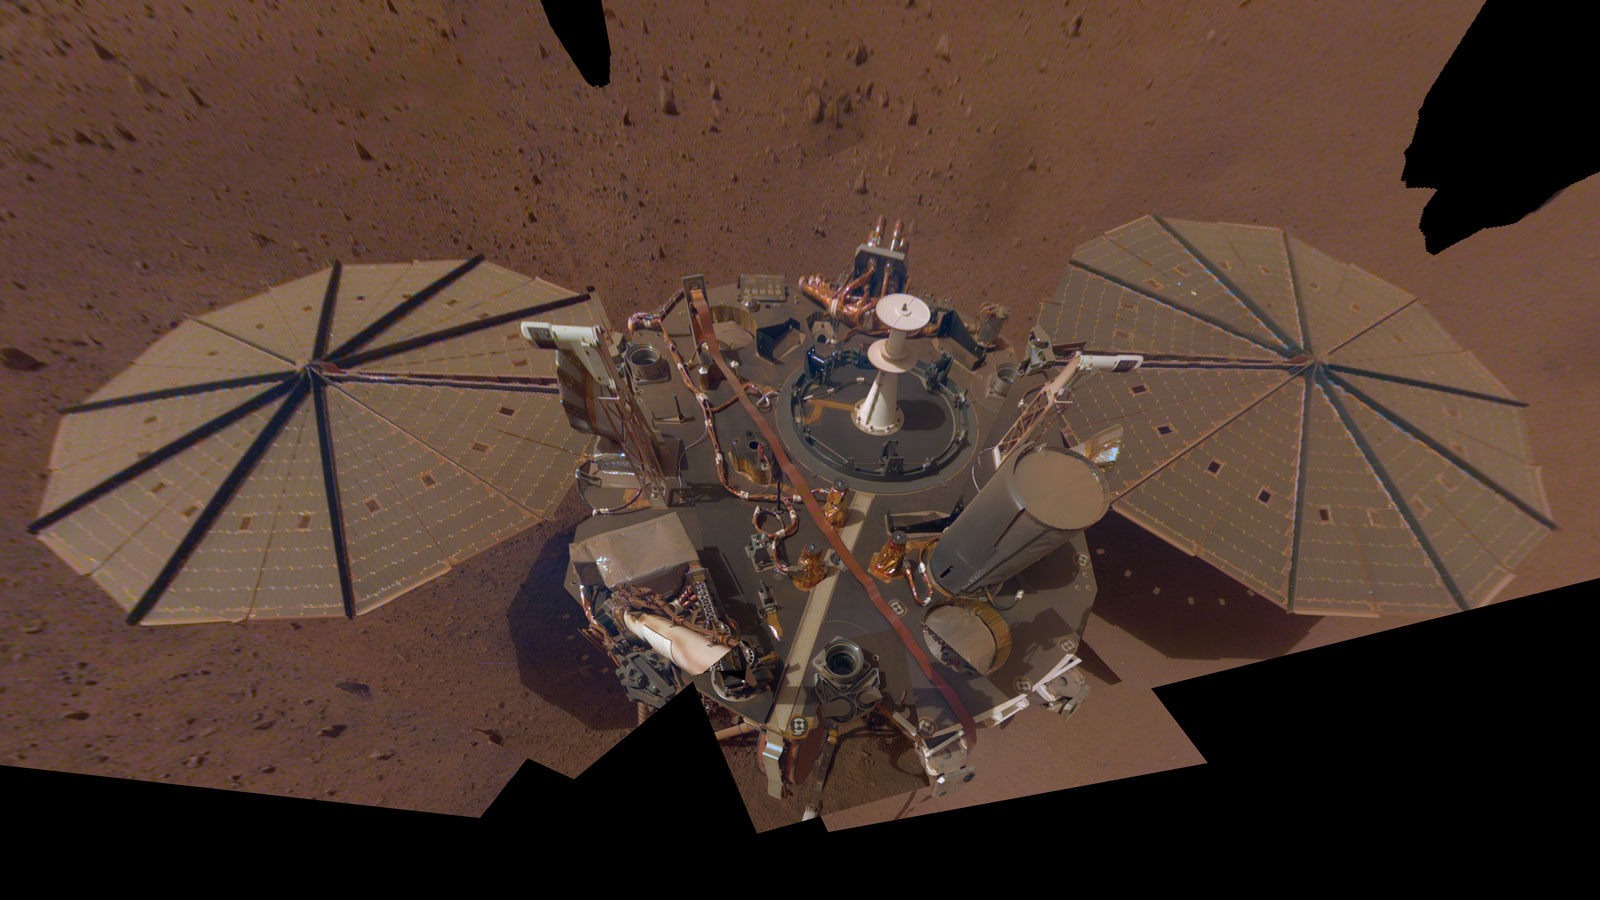 spacecraft on reddish surface, seen from above, covered in dust